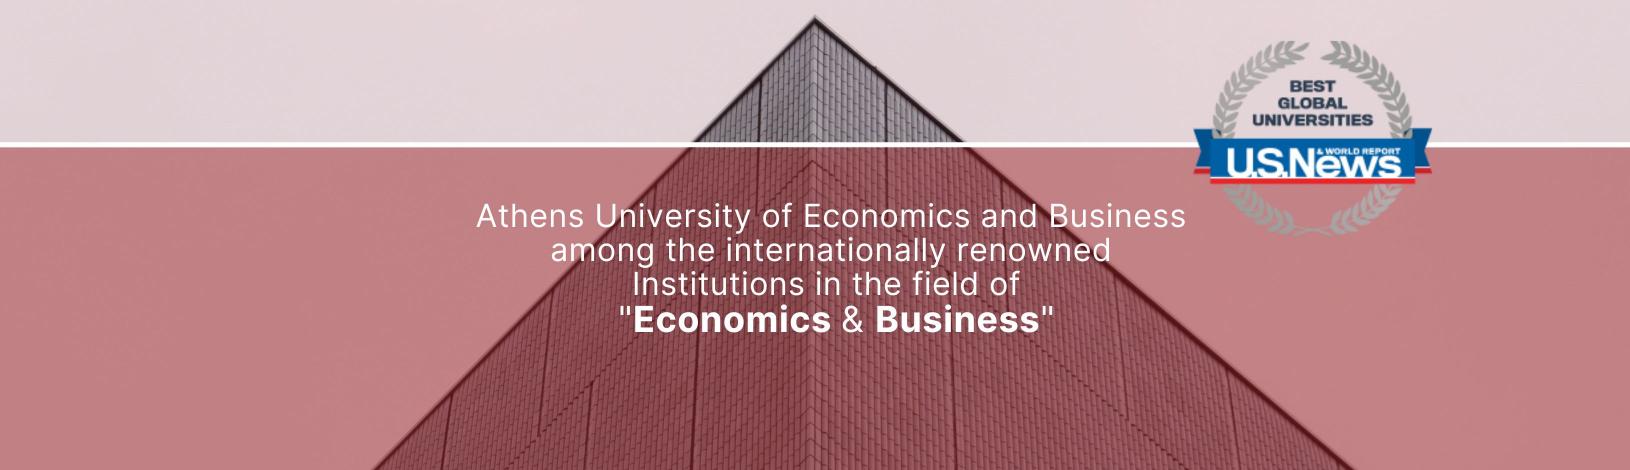 International distinction of the Athens University of Economics and Business in the field of "Finance and Business Administration"